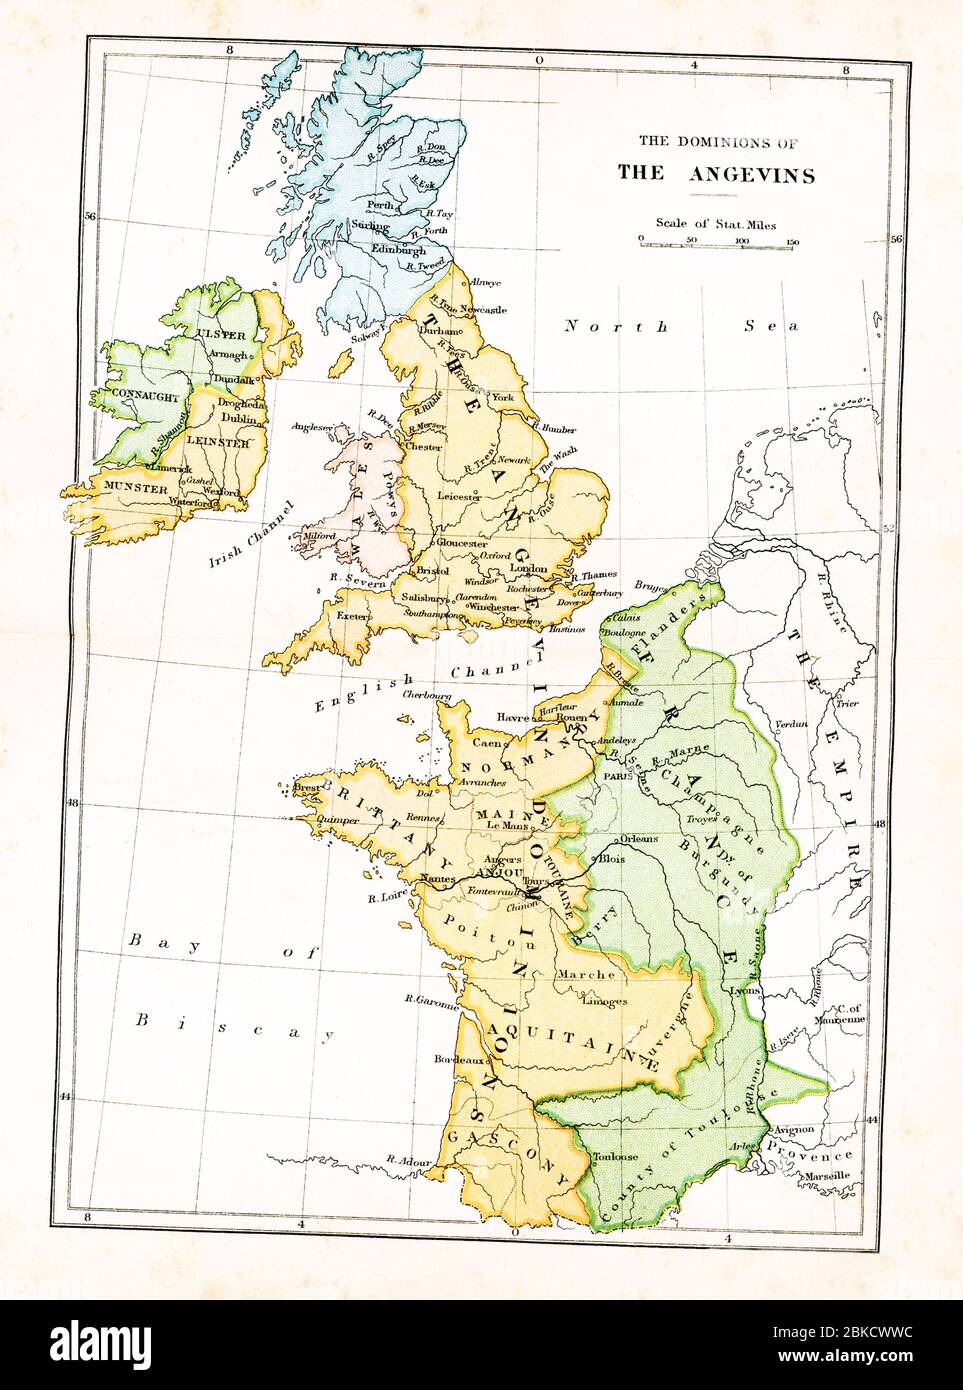 This map shows the dominions of the Angevins in Britain. The Angevins were a royal house of French origin that ruled England in the 12th and early 13th centuries; its monarchs were Henry II, Richard I, and John. Stock Photo